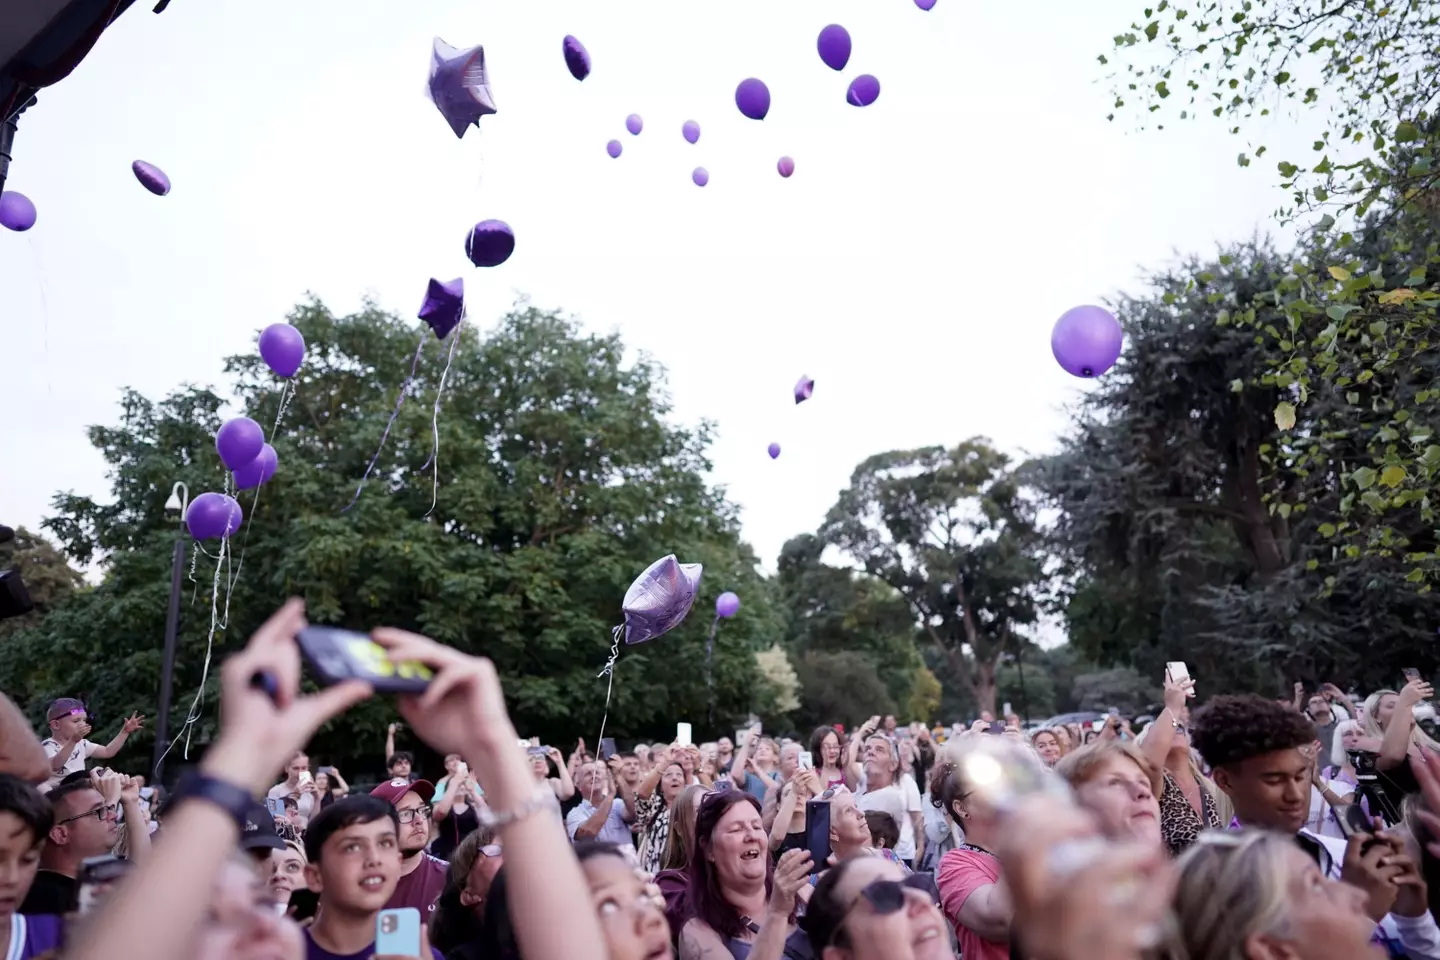 Attendees at the vigil released purple balloons into the sky.